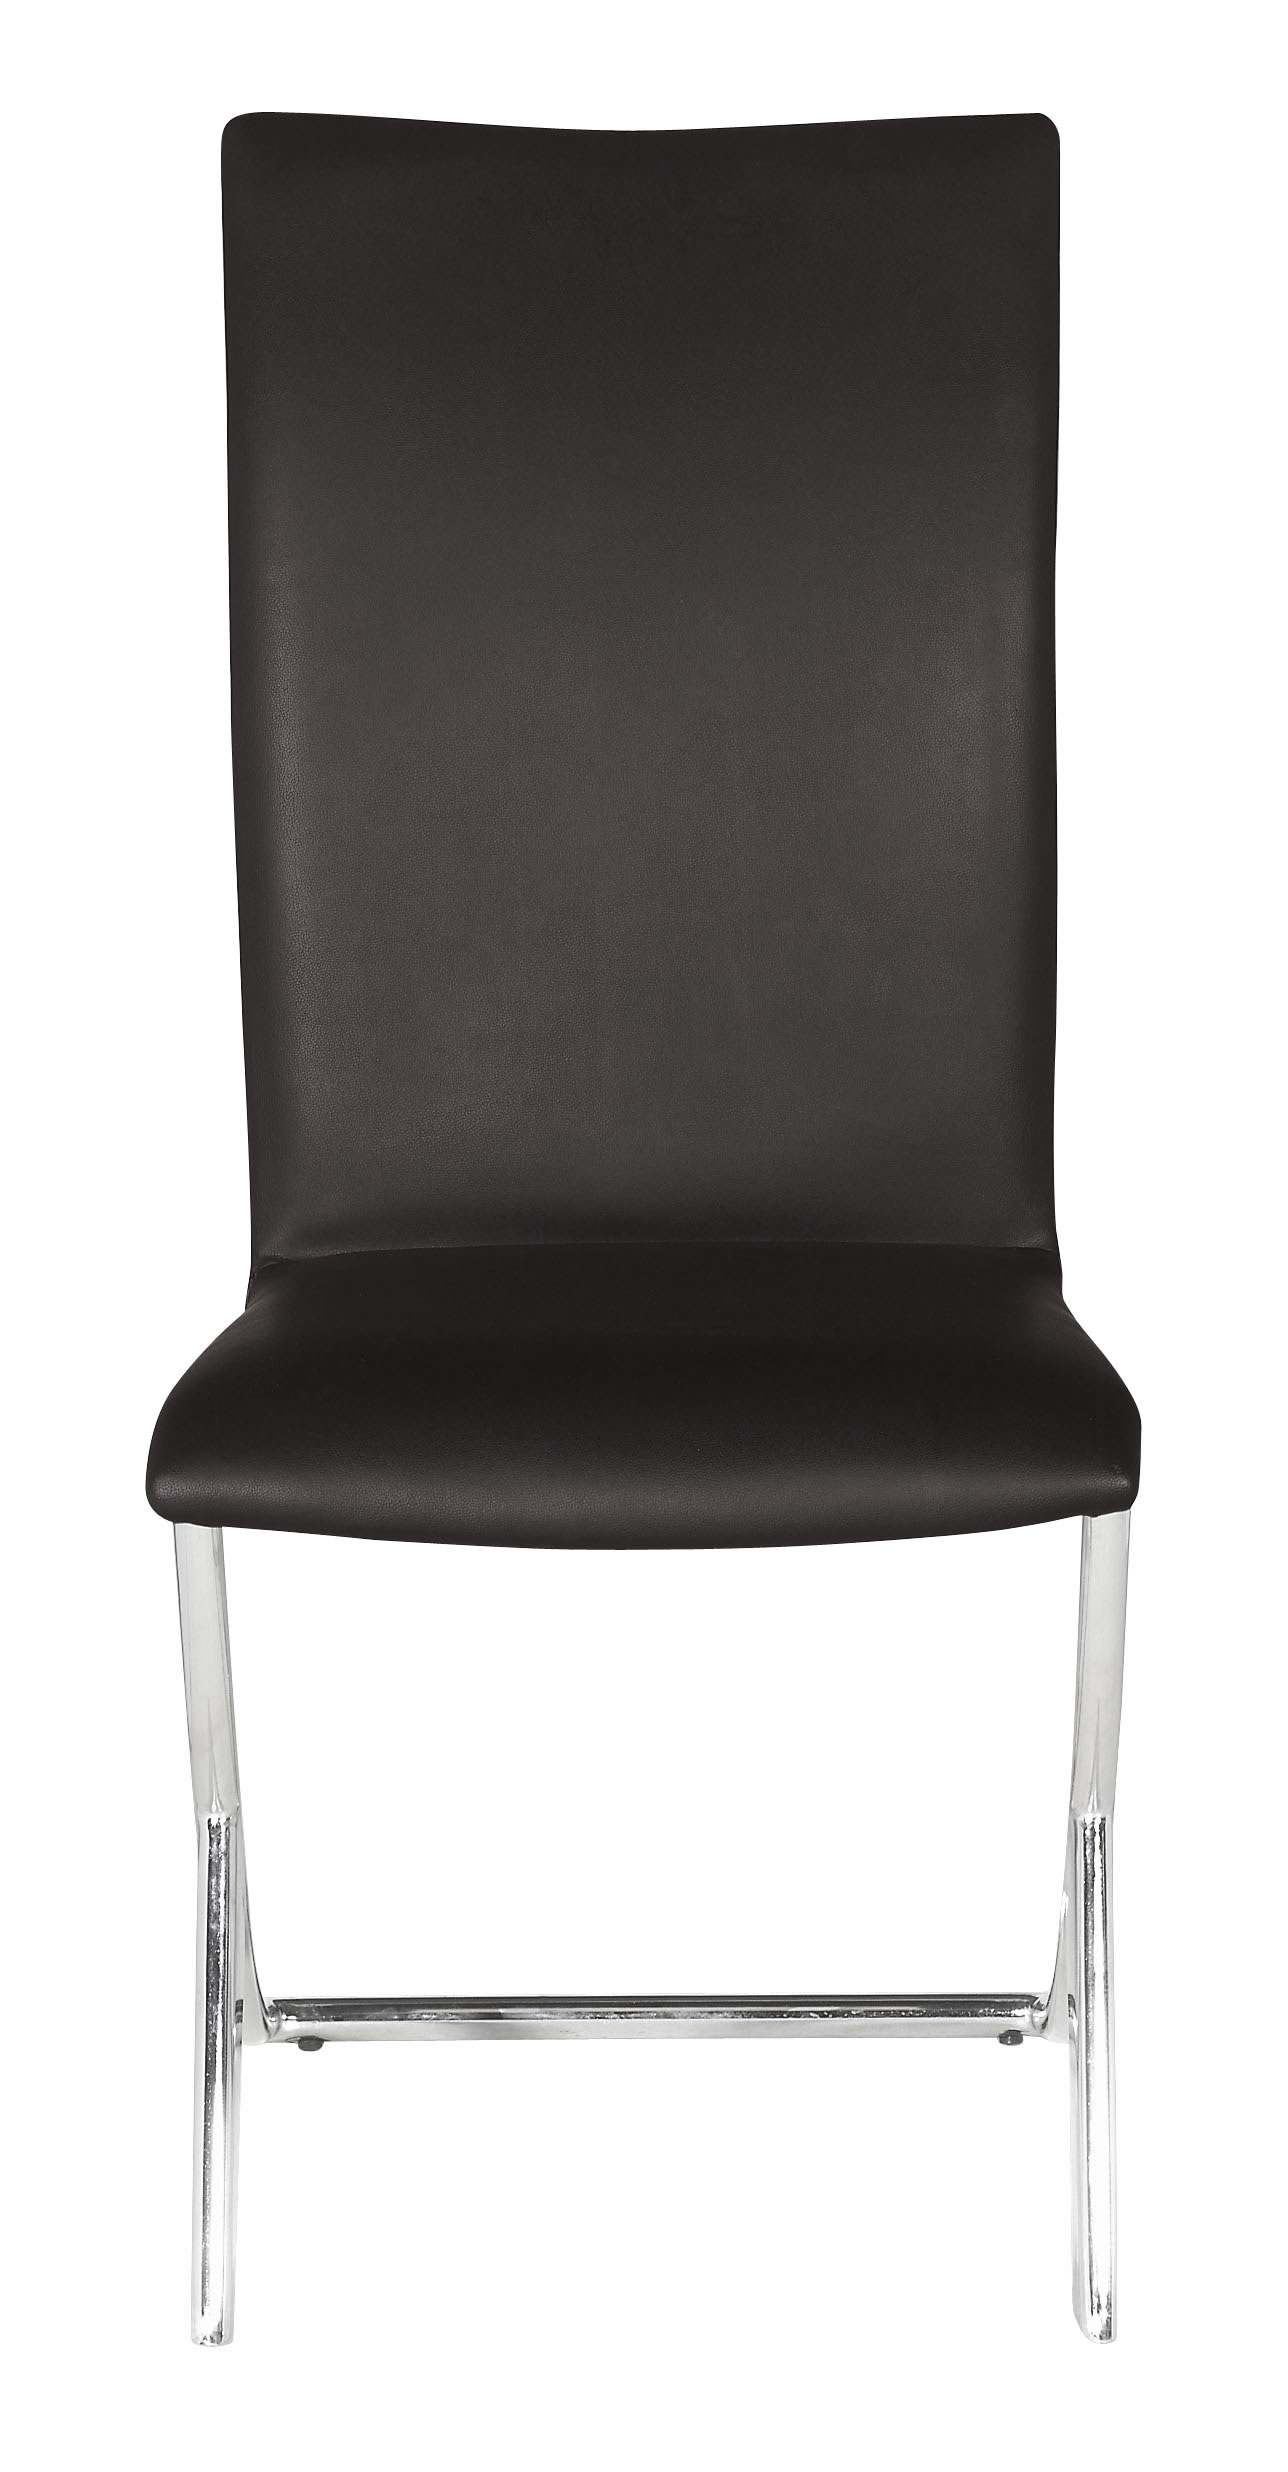 Warm Espresso Leatherette and Chrome Dining Chairs Set of 2